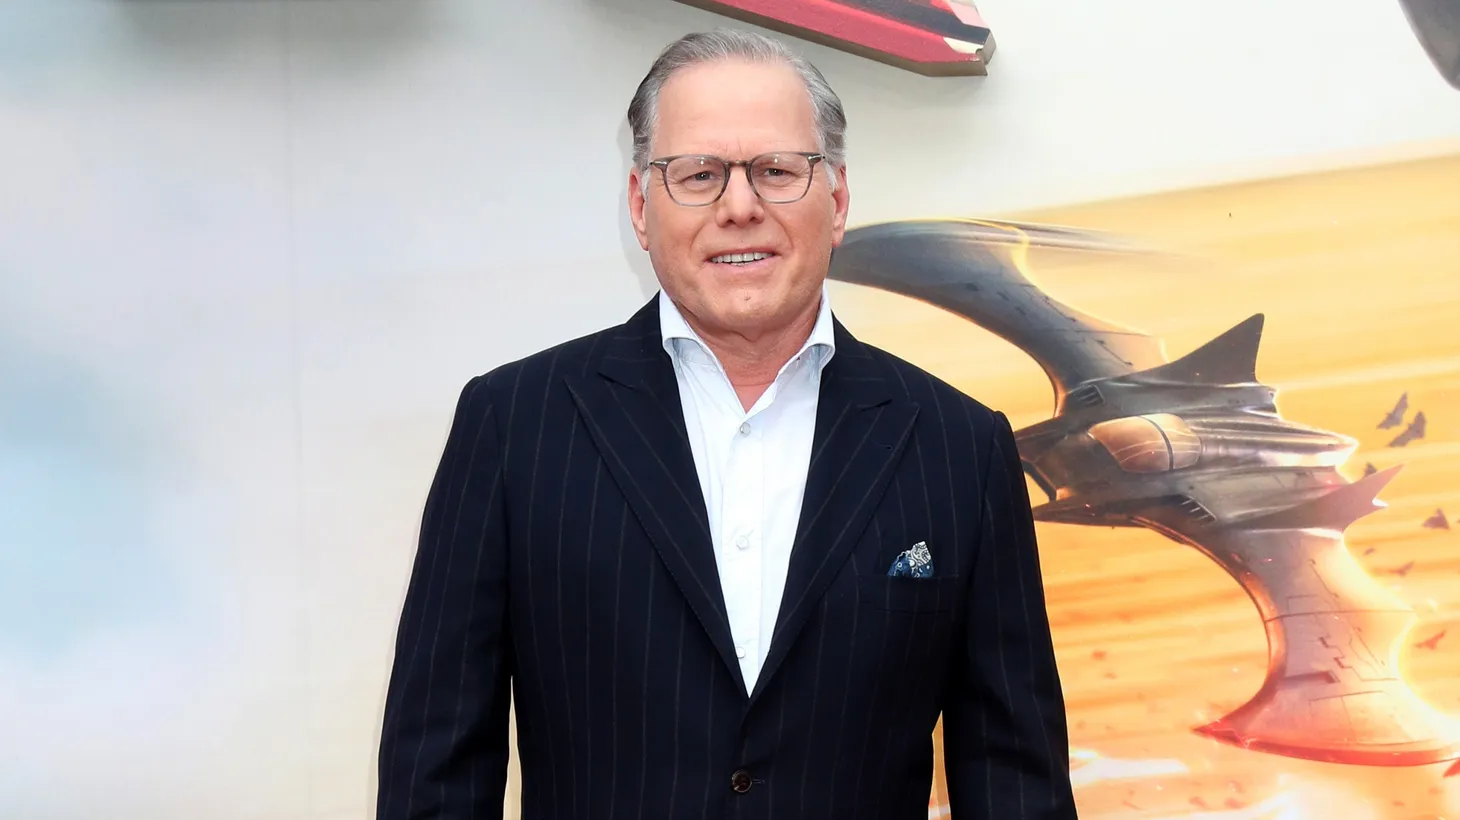 “I don't think David Zaslav has seen that much red ink… the way the movie business can generate red ink in oceans,” says Kim Masters. Warner Bros. Discovery CEO David Zaslav attends “The Flash” premiere at the Ovation Hollywood Courtyard in Los Angeles on June 12, 2023.